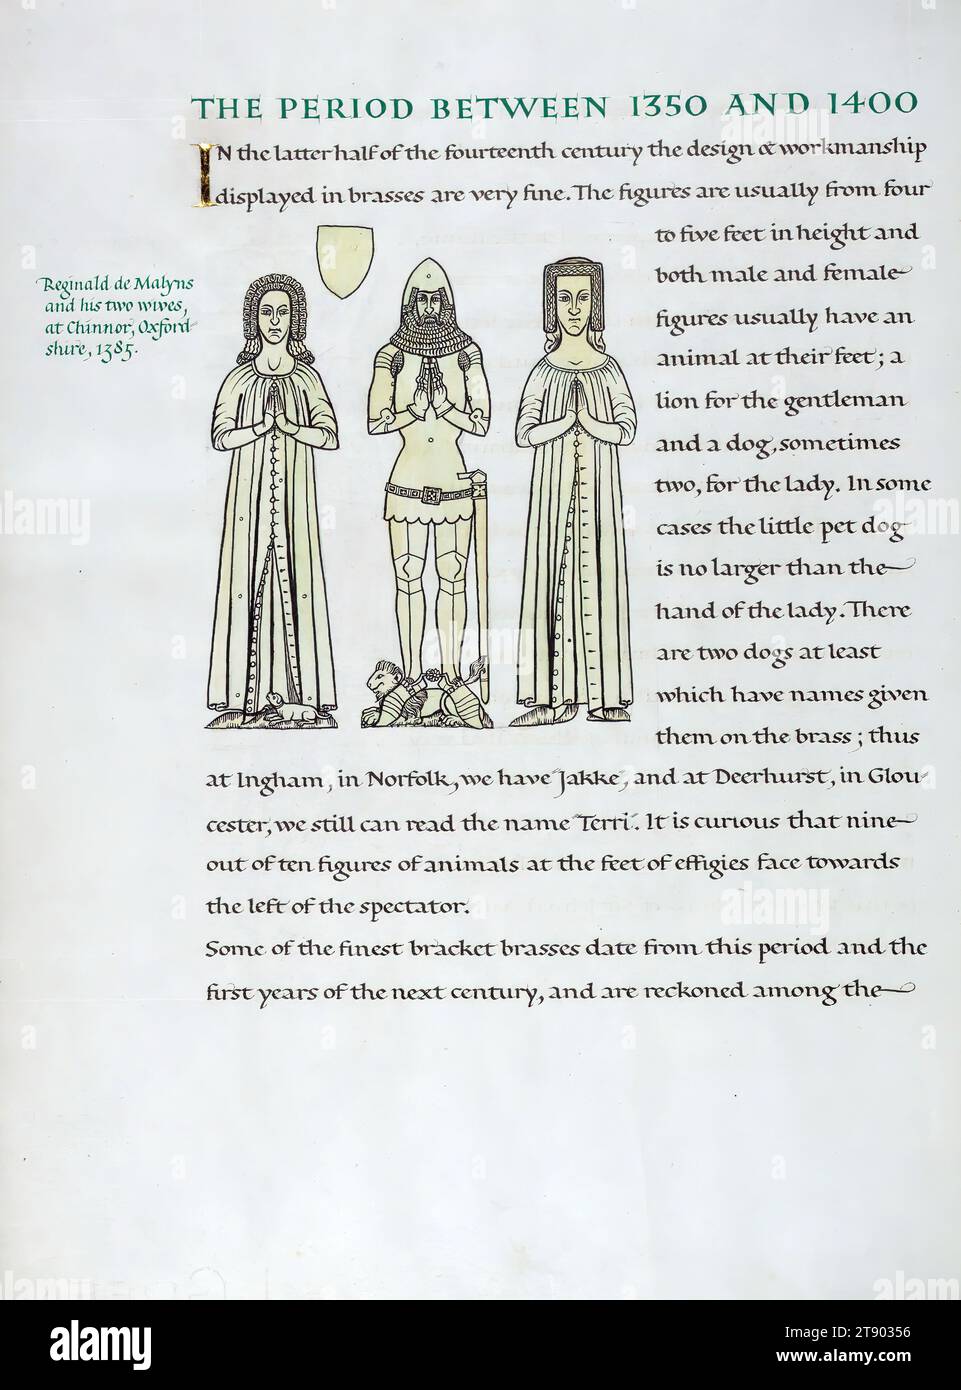 English Brasses, Illustration of Reginald de Malyns and his two wives, at Chinnor, Oxfordshire, 1385, John Woodcock, a twentieth-century calligrapher, hand wrote, illustrated, and bound this book on English Brasses. The manuscript contains drawings of brass rubbings of many knights and nobles, including Sir John d'Abernon, Thomas de Hope, and Nichol de Gore, as well as noble women such as the wives of Reginald de Malyns, Nicholas Wadham, and Nicholas Wotton Stock Photo